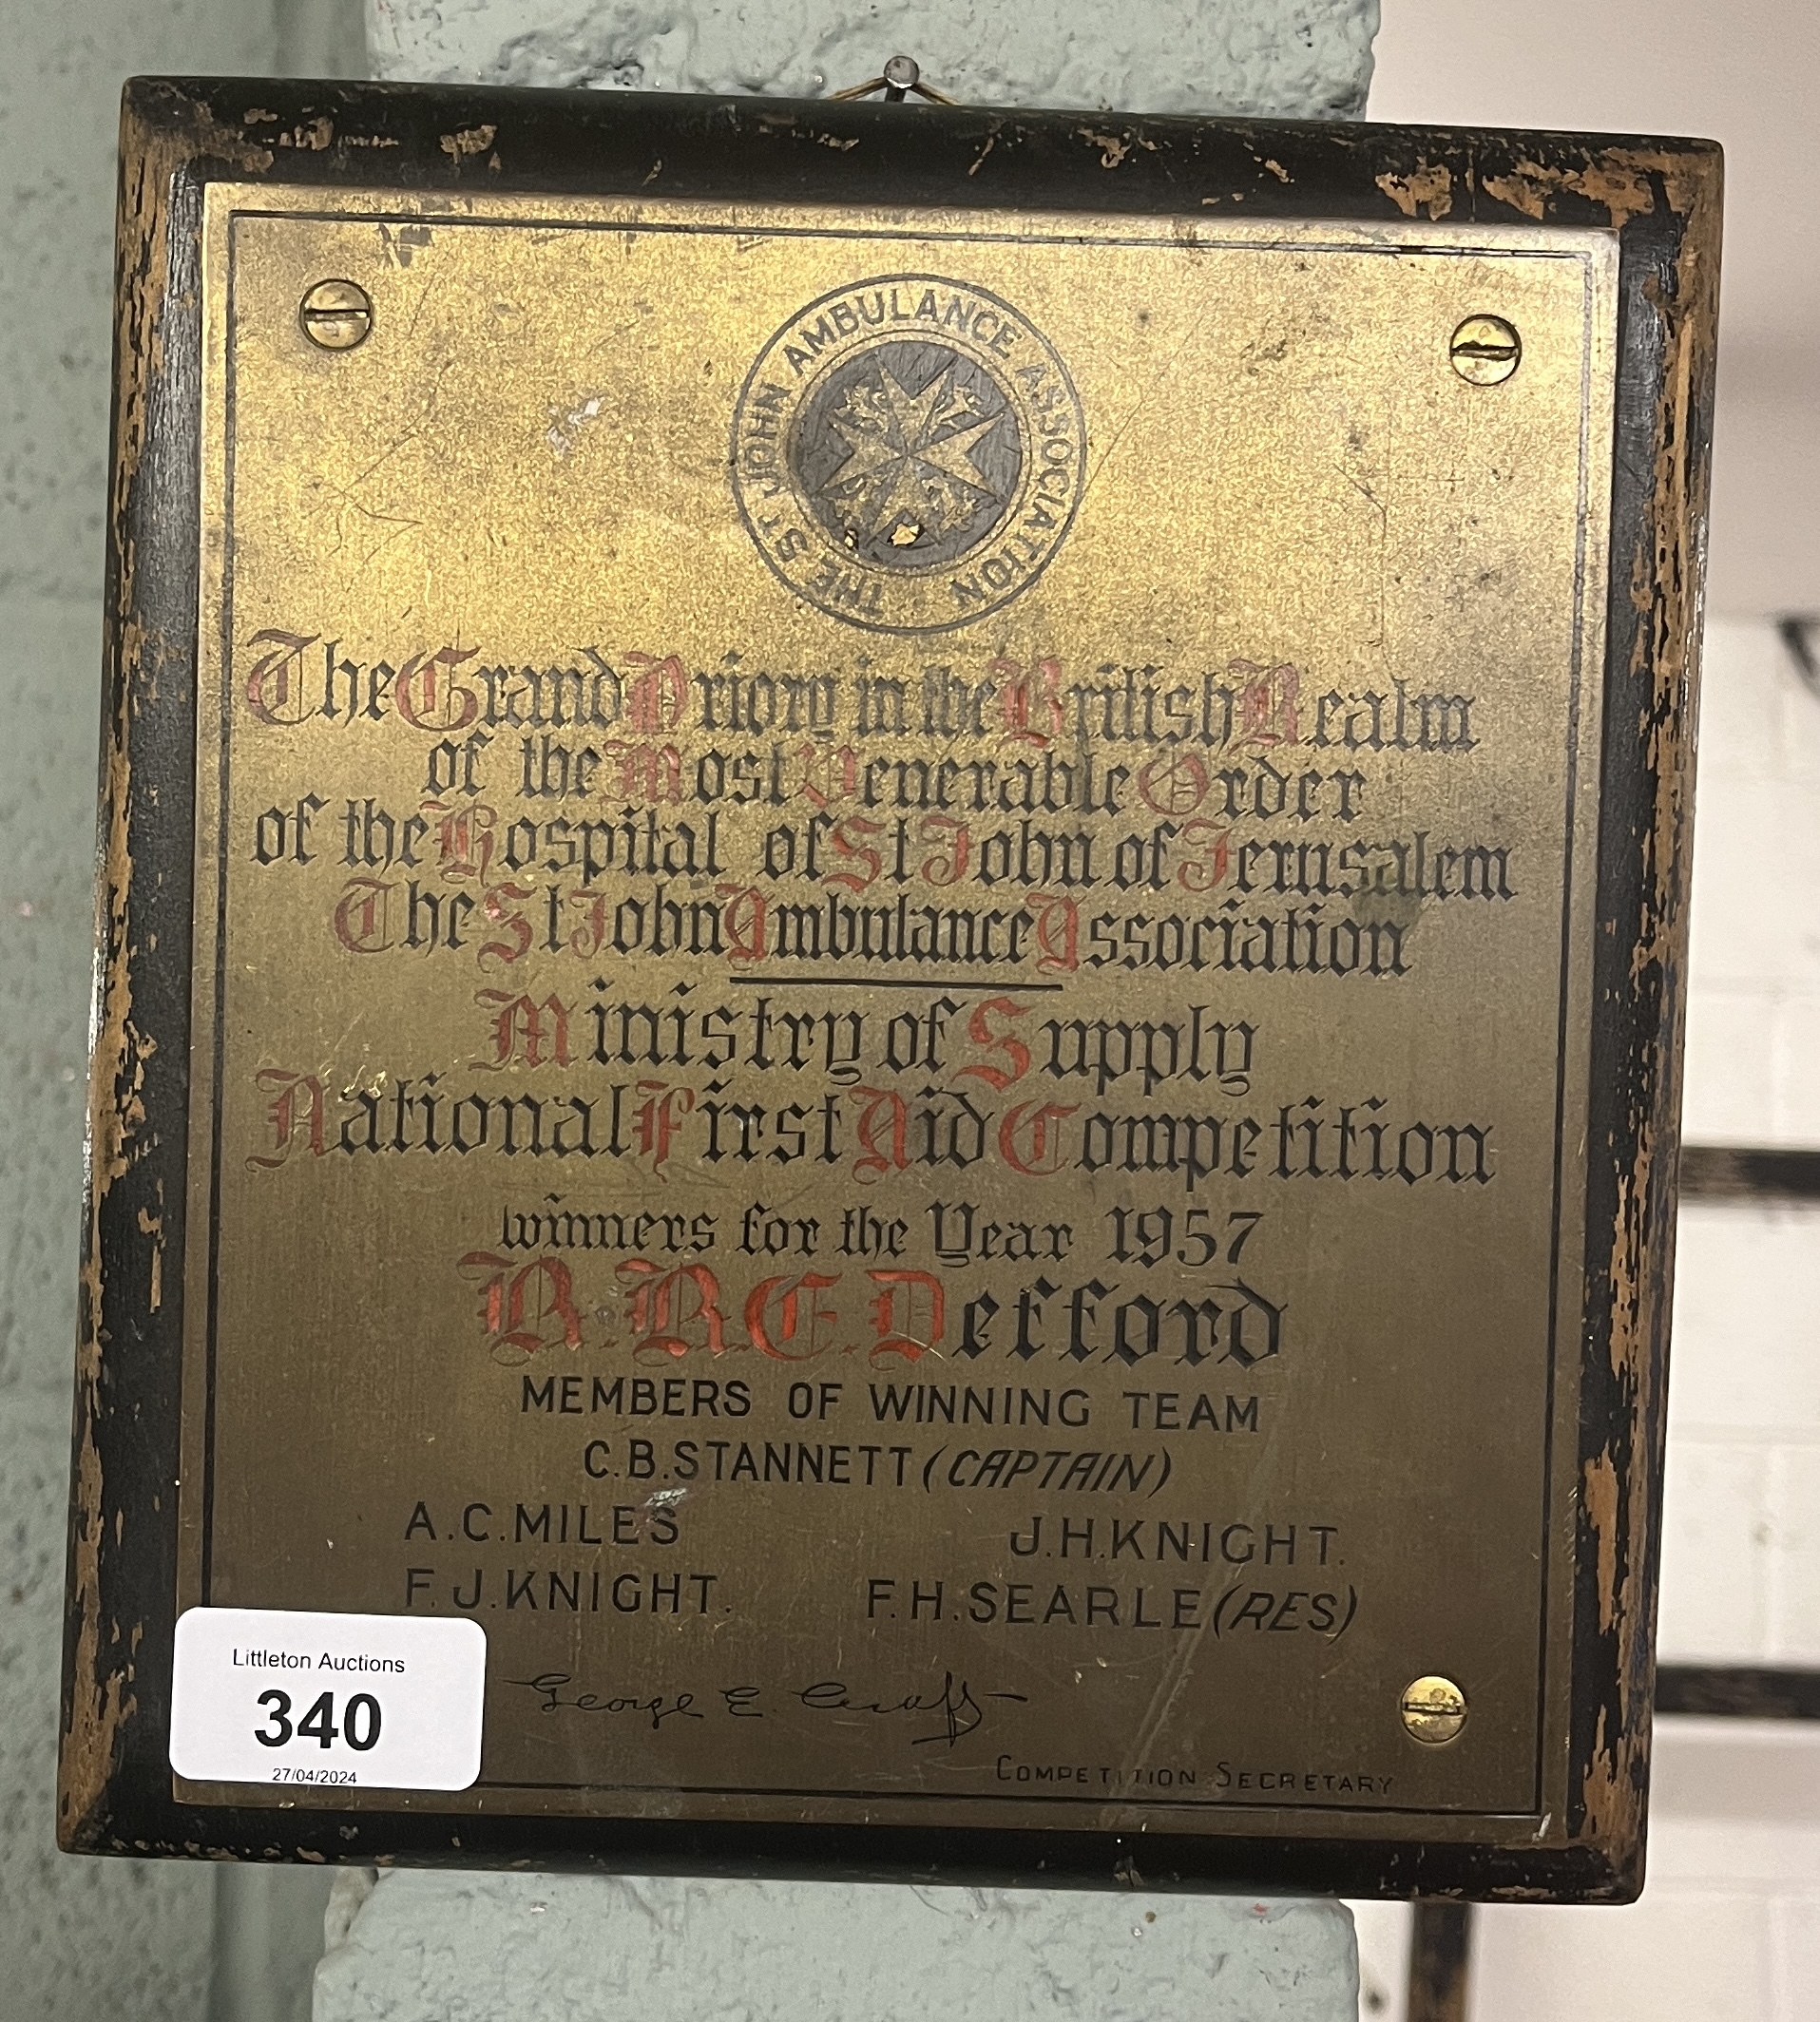 St John Ambulance association national First Aid competition plaque 1957 - Image 2 of 2